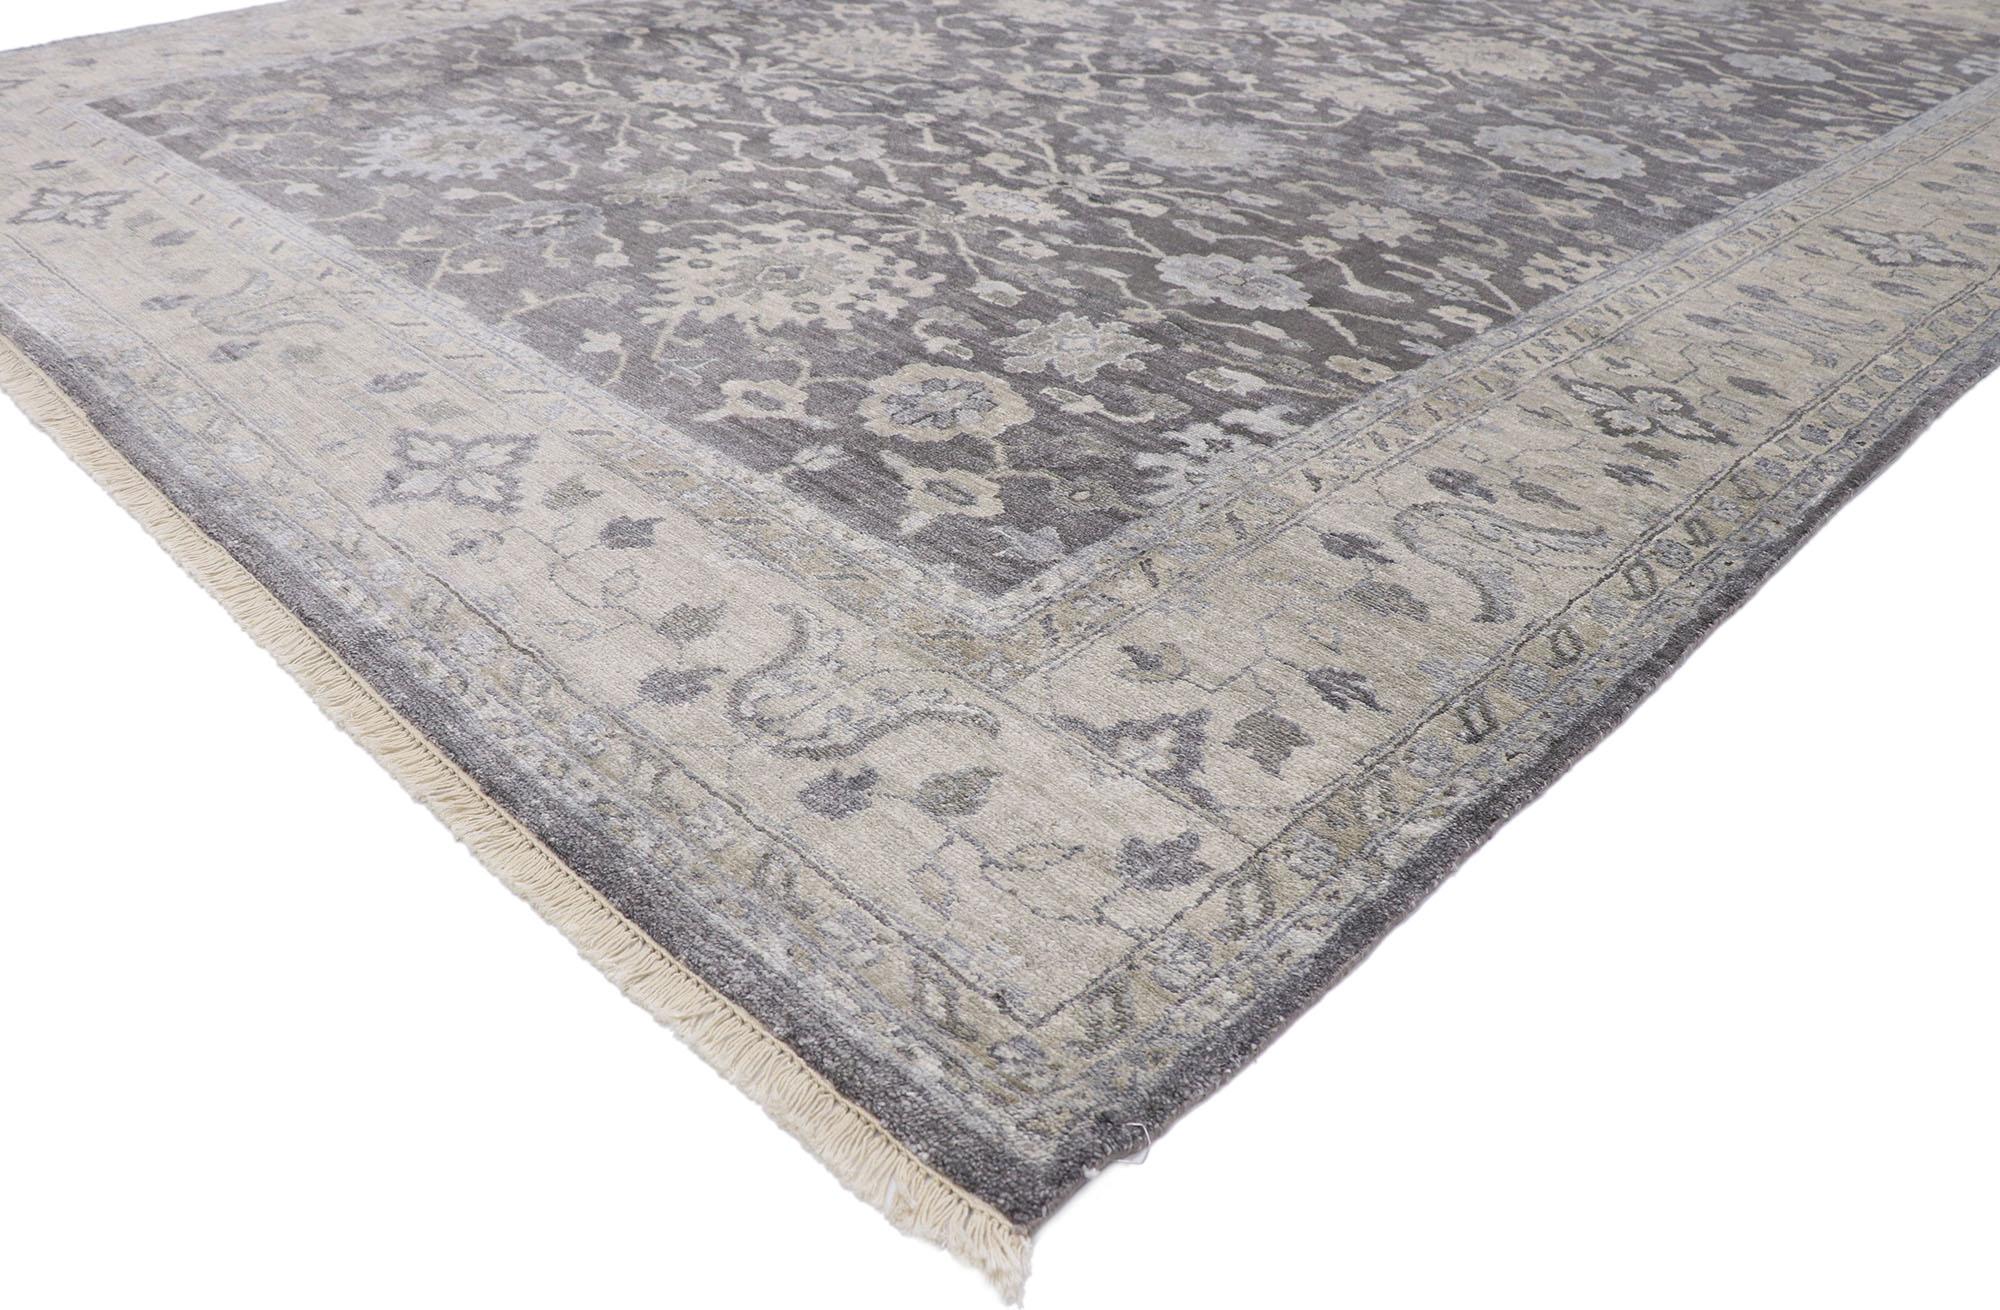 30246, new contemporary Oushak transitional gray rug with modern style. Large, lush palmettes in a Shah Abba style dance on a sea of abrashed gray, connected by an angular lattice pattern. The transitional Oushak style rug is framed by lighter